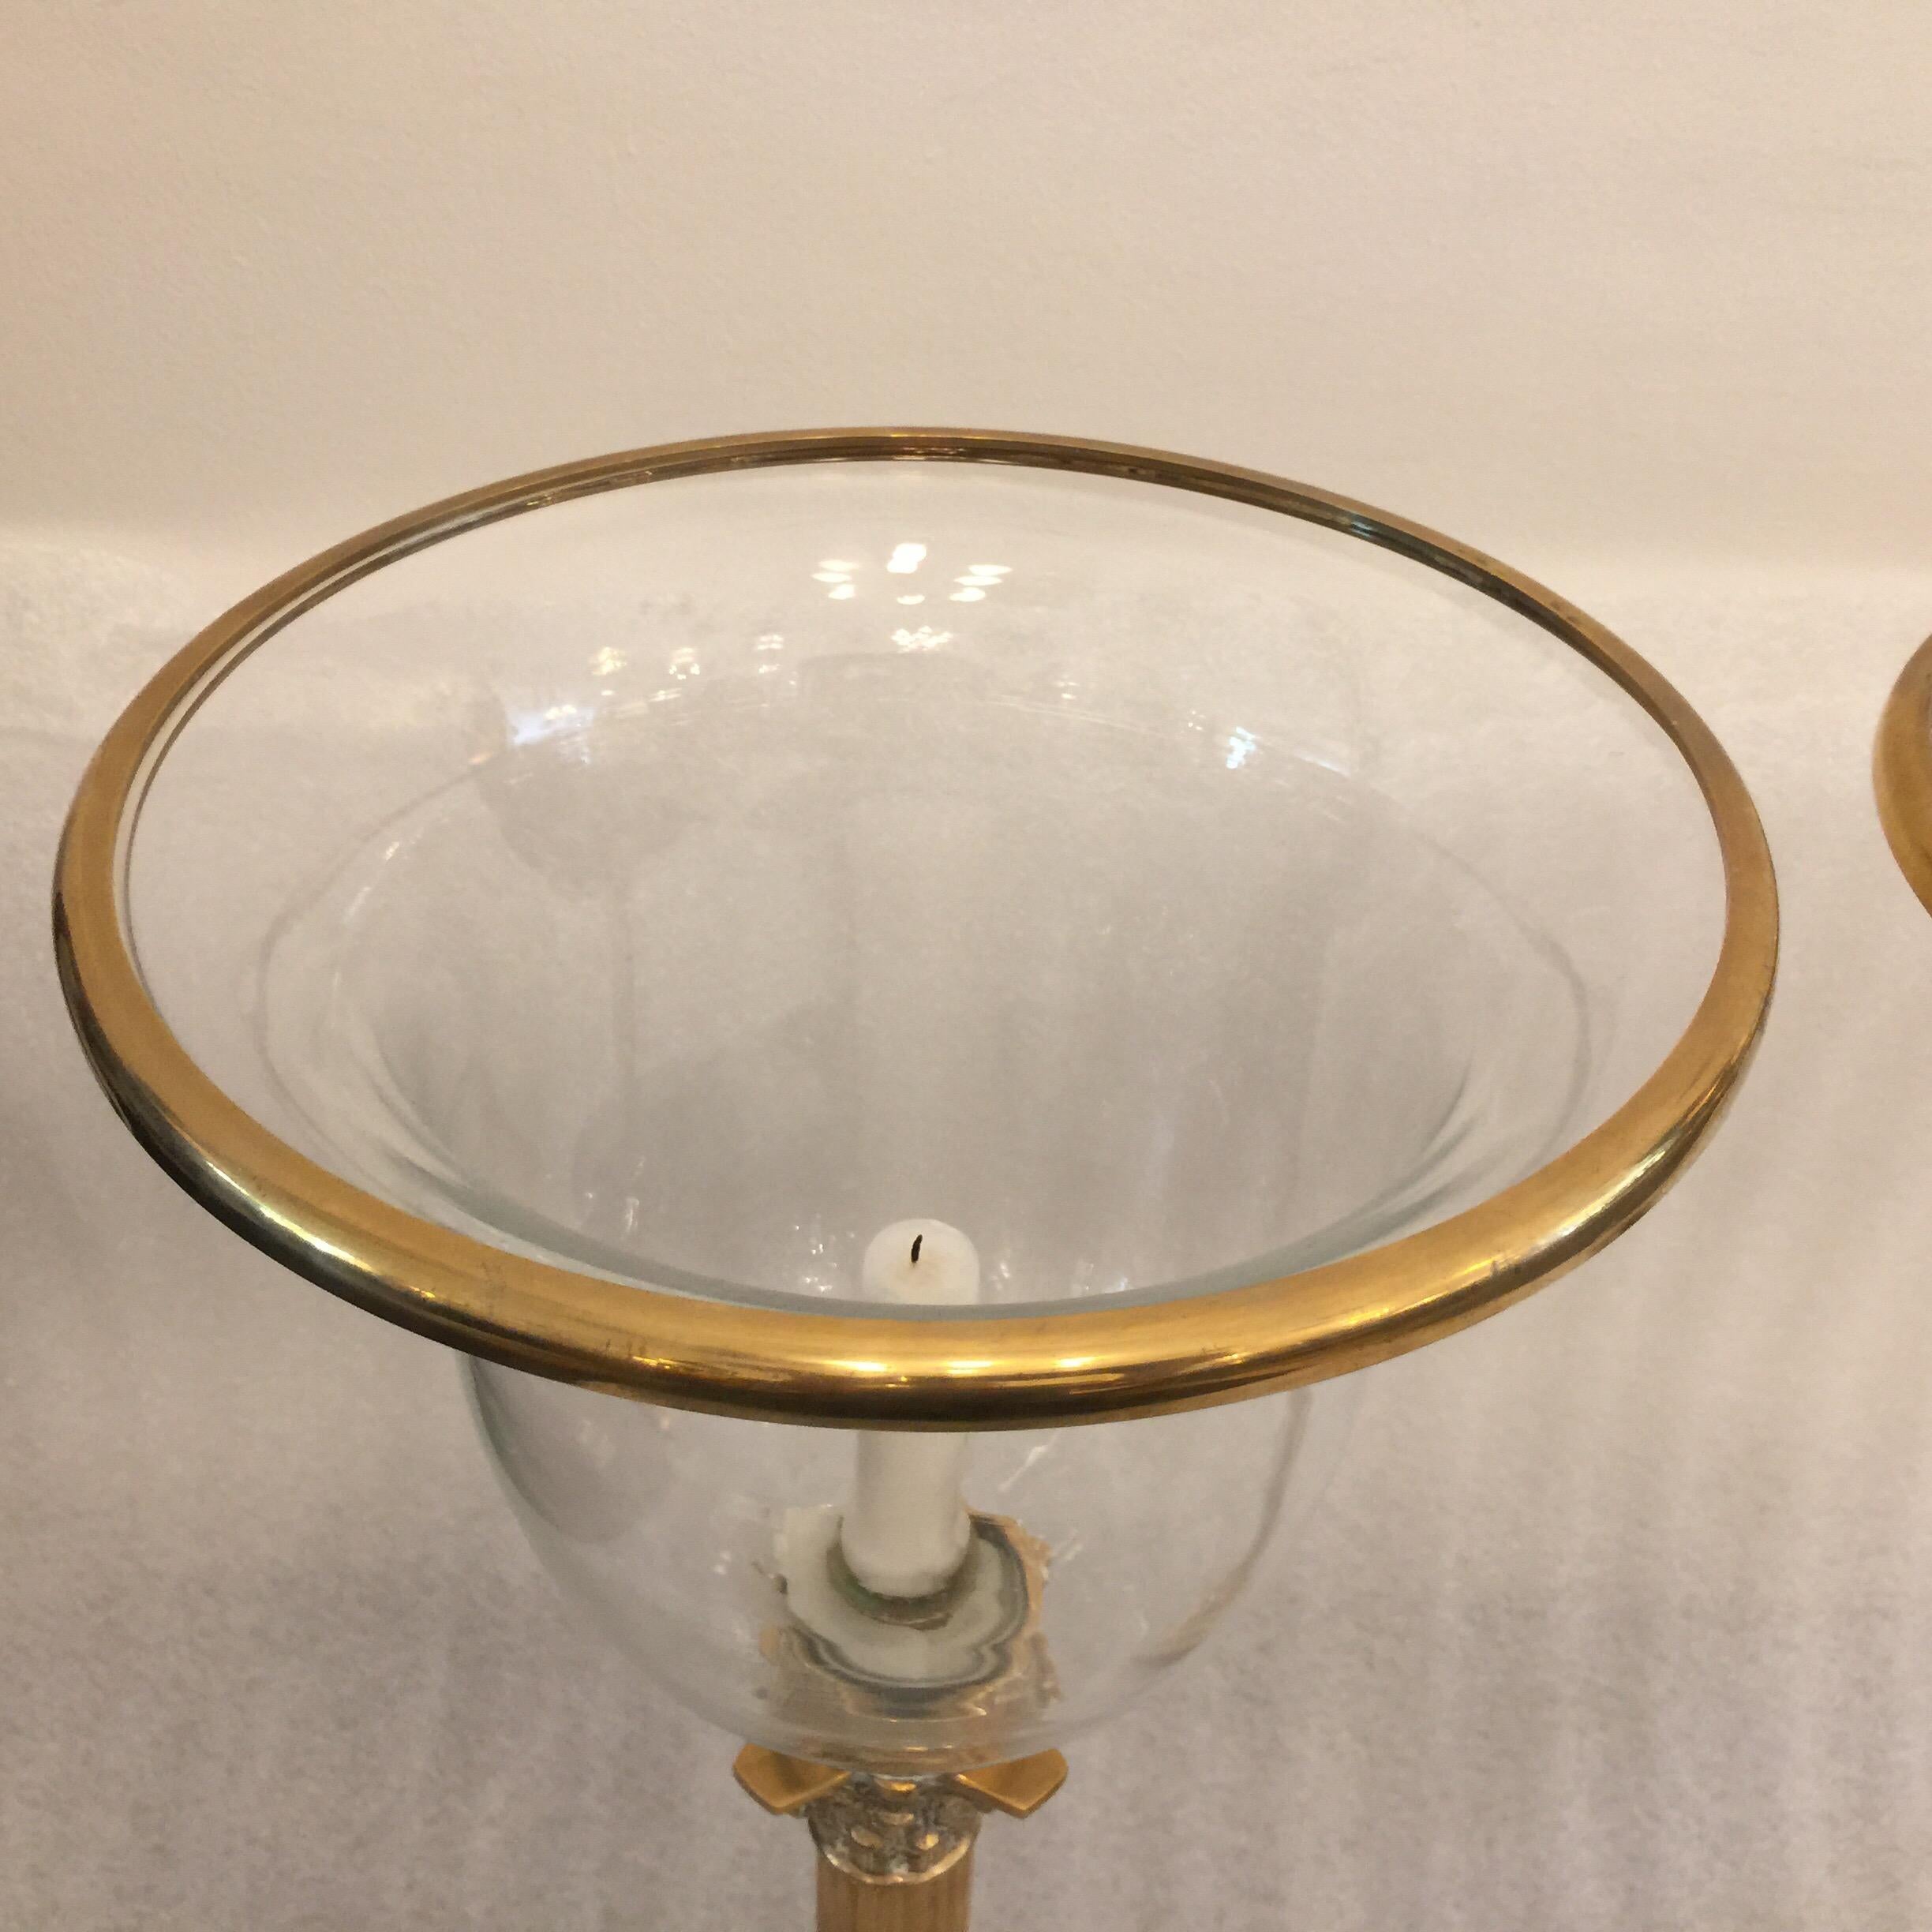 These are handblown glass difusers with original brass trim top and wonderfully patinated brass Corinthian column bases. Very heavy and beautiful.

The matching lantern is slightly shorter by 1/2 inch. Visible in the pics provided. Not noticeable